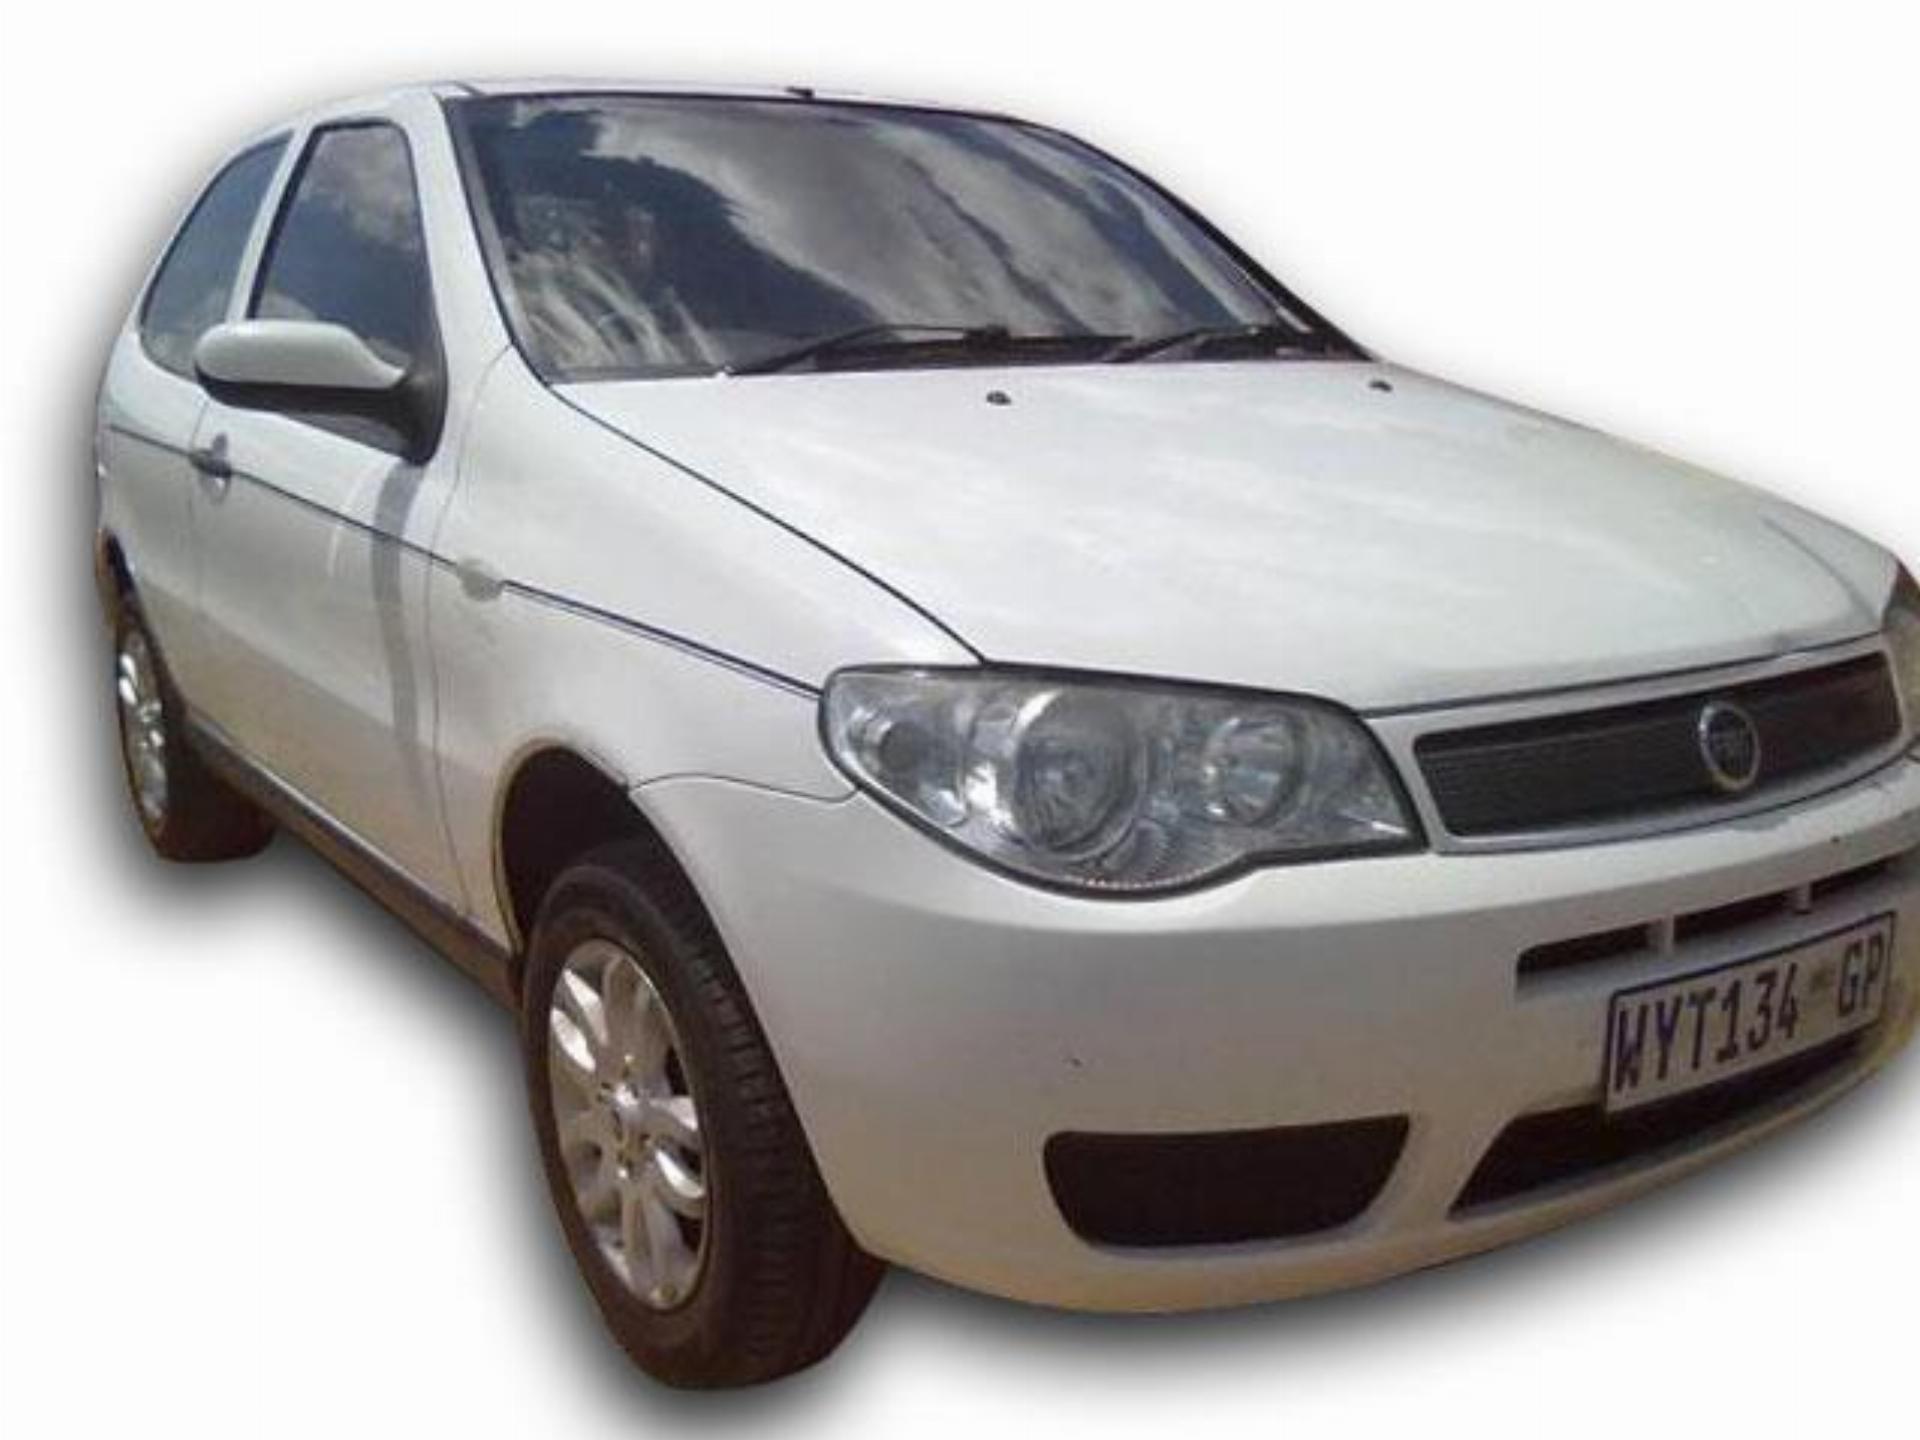 Used Fiat Palio II 1.2 Vibe 2008 on auction PV1003778